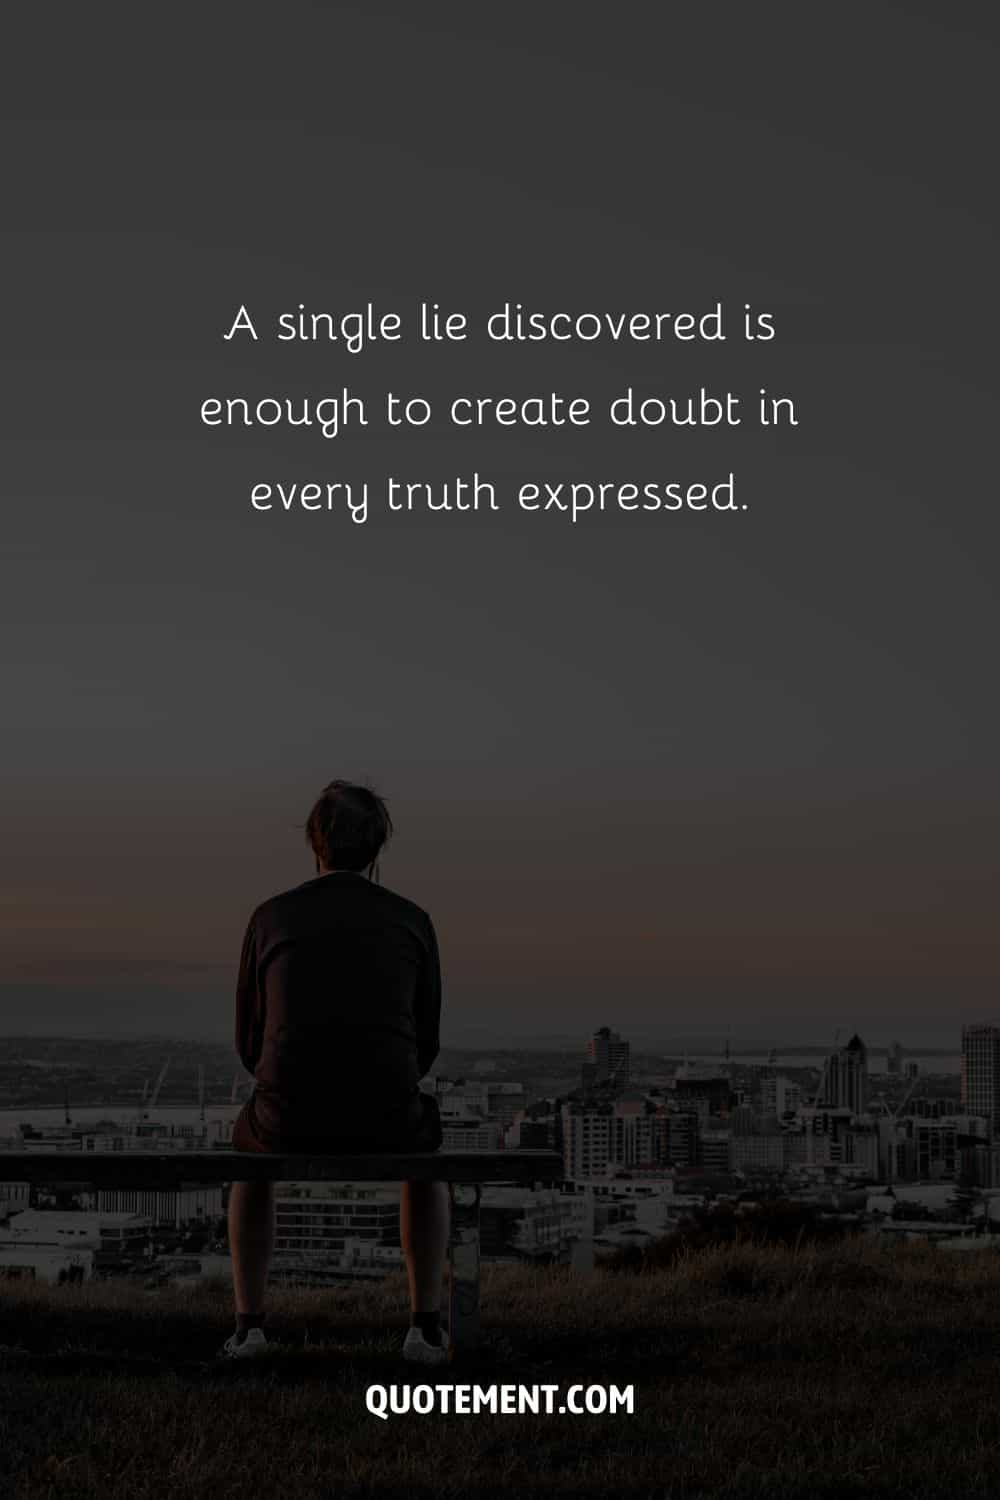 “A single lie discovered is enough to create doubt in every truth expressed.” — Unknown